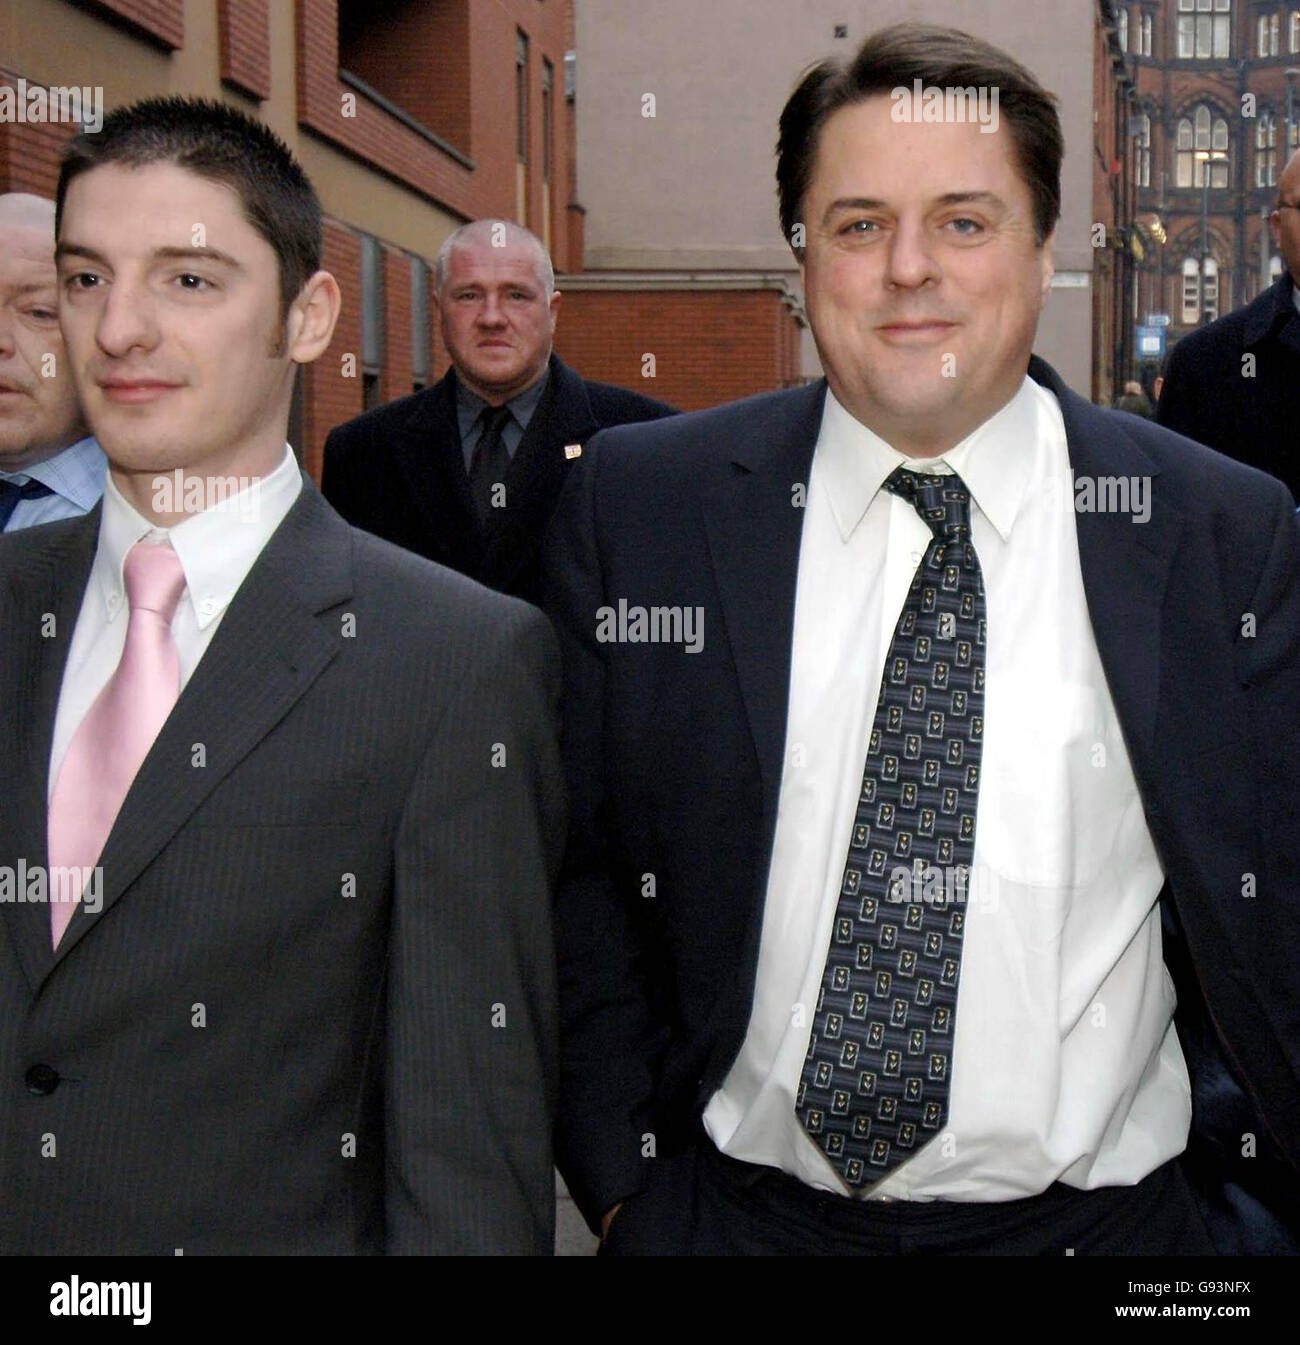 British National Party leader Nick Griffin (right) and party activist Mark Collett (left) arrive at Leeds Crown Court where their trial continues Tuesday January 24, 2006. Griffin has pleaded not guilty to four race hate charges in connection with a BBC undercover documentary on the party, while Collett has denied eight similar charges. Watch for PA story COURTS BNP. PRESS ASSOCIATION photo. Photo credit should read: John Giles/PA. Stock Photo